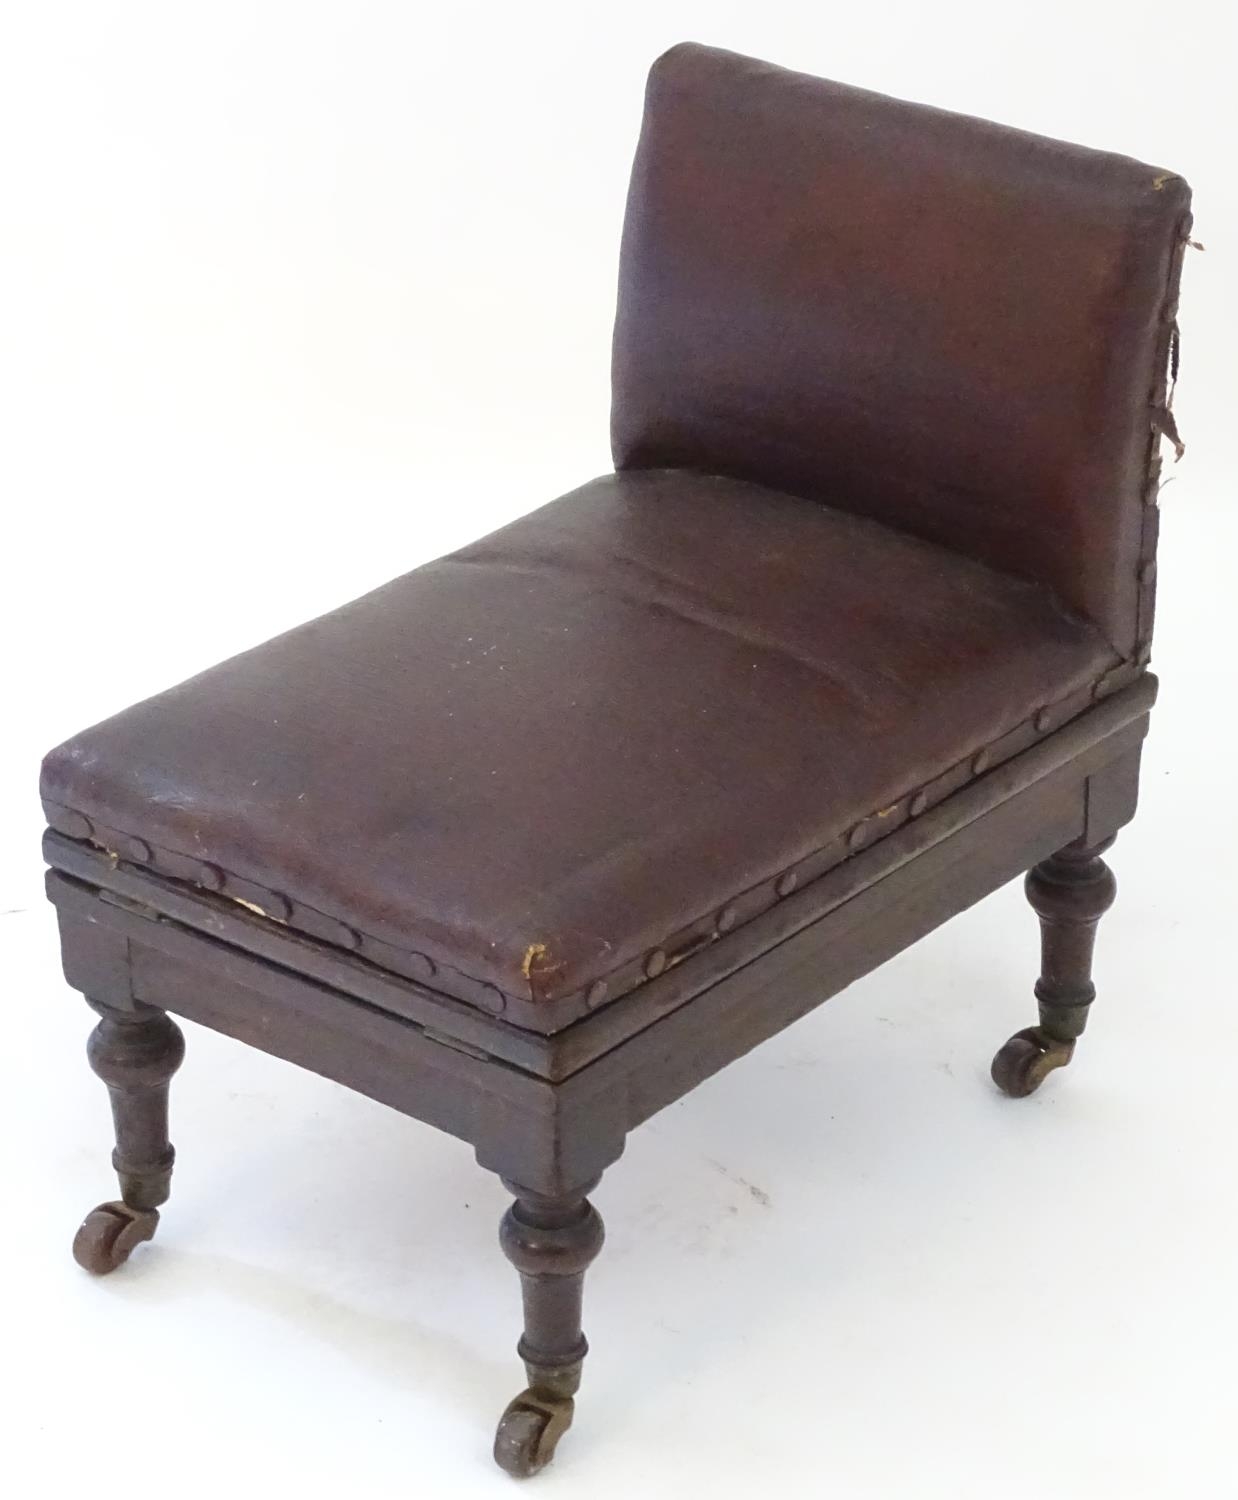 A late 19thC mahogany adjustable gout stool with leather upholstery and studded detailing, - Image 10 of 12